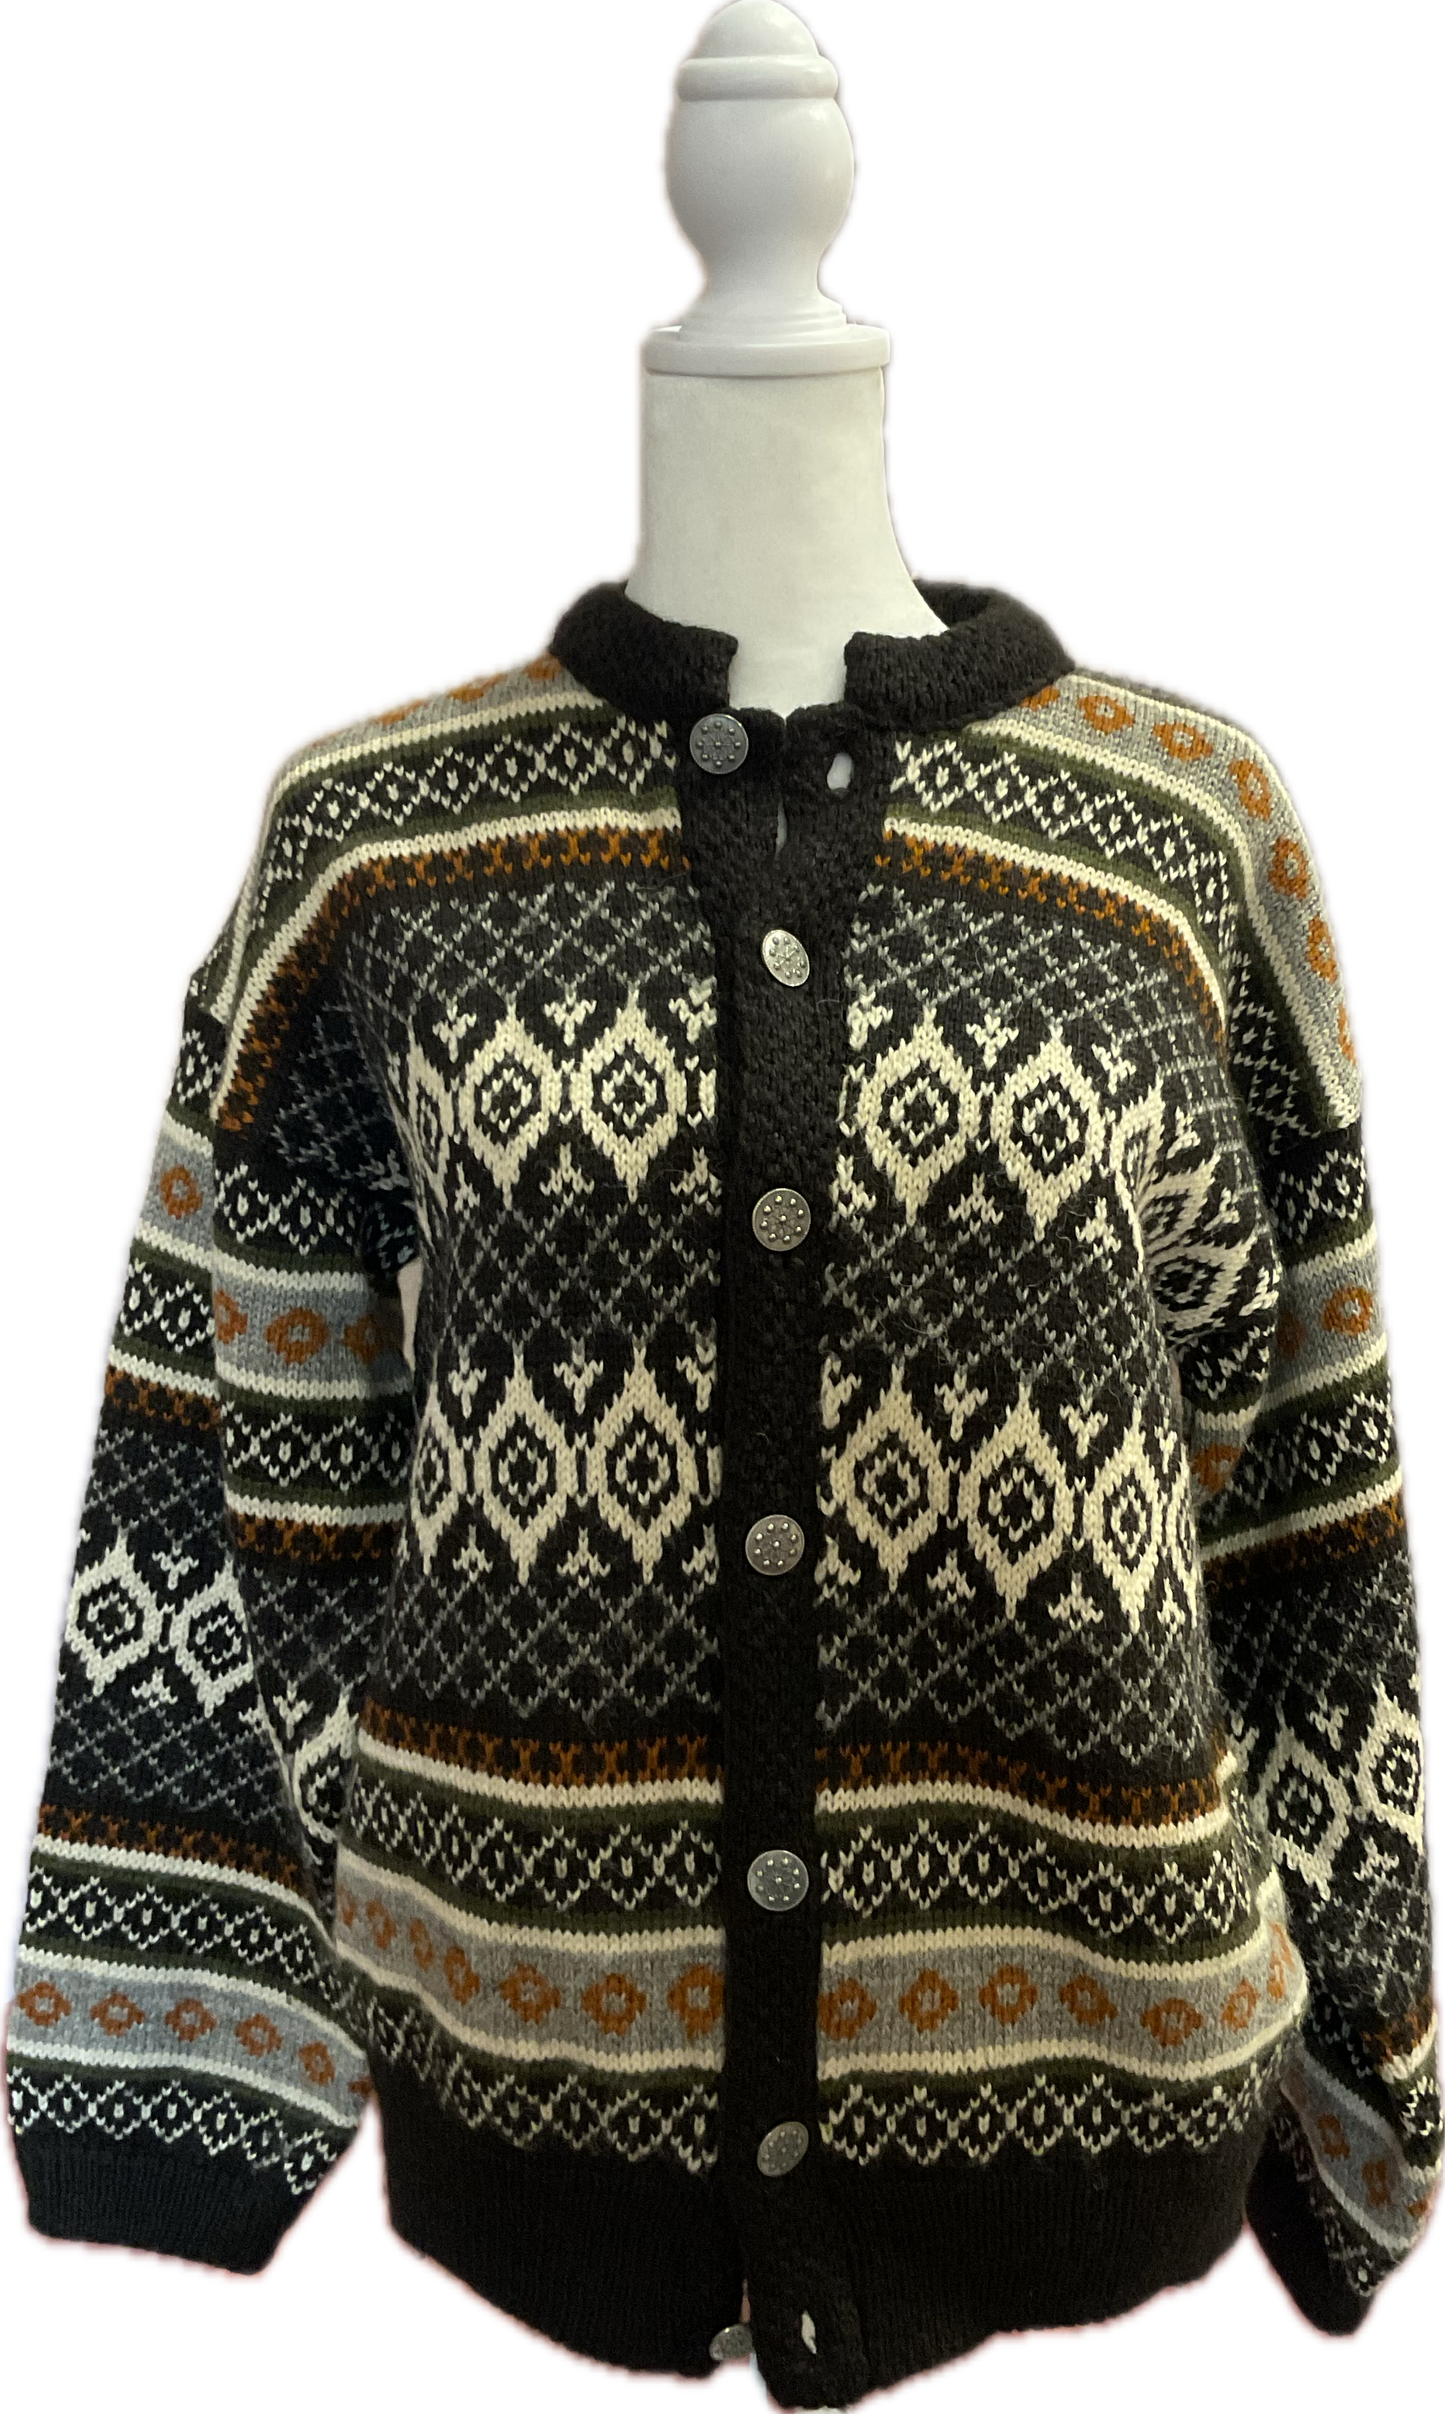 Vintage Fjordland of Norway Multipattern Striped Wool Cardigan Sweater in Green ,Orange, Grey, White, Black with Silver Snowflake Buttons